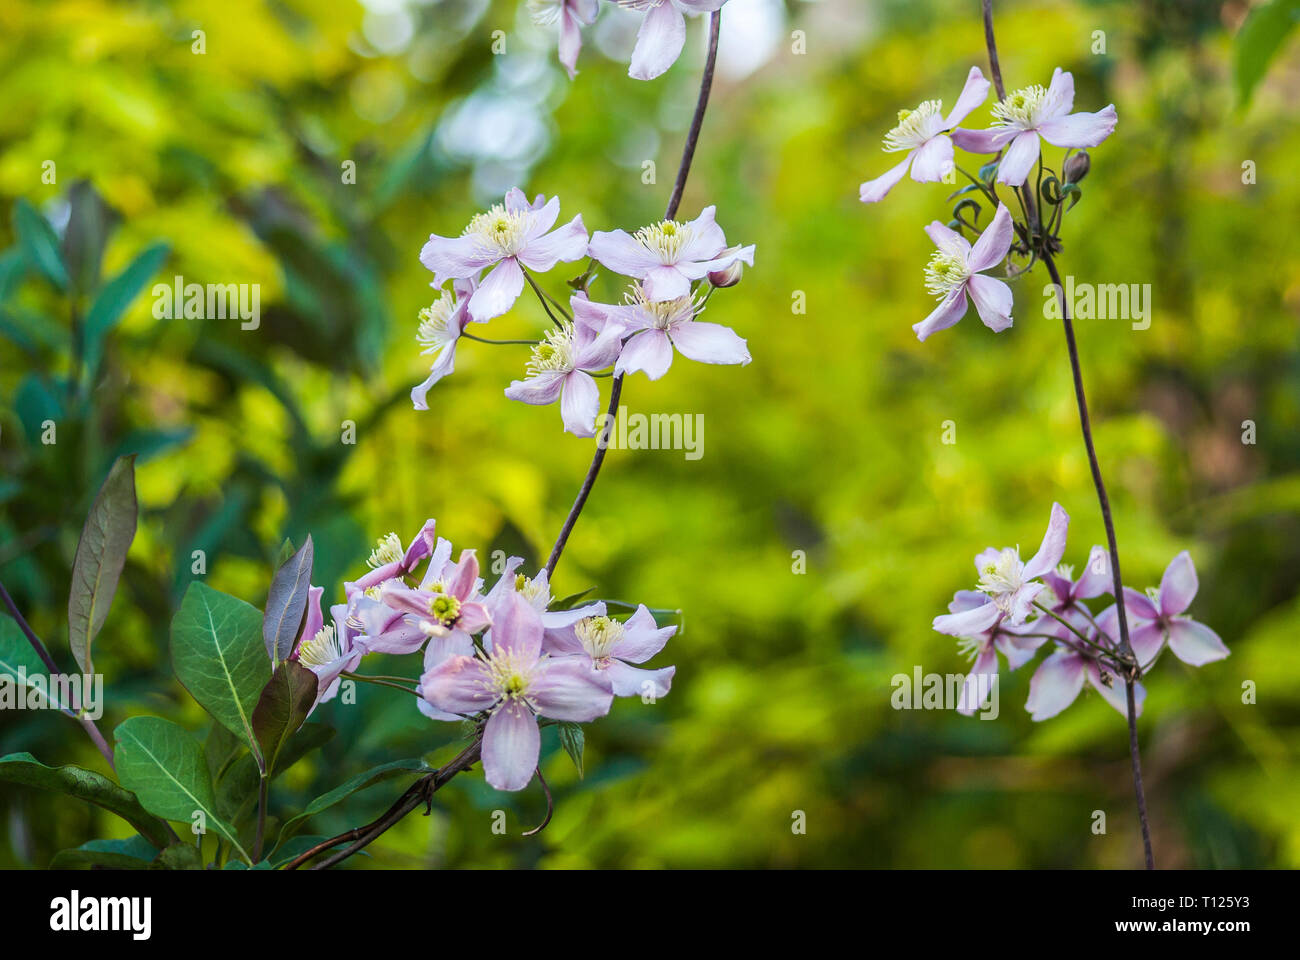 Clematis montana 'Rubens', 'pink perfection', flowering from freely hanging stalks,, short depth of field, blurred green background Stock Photo